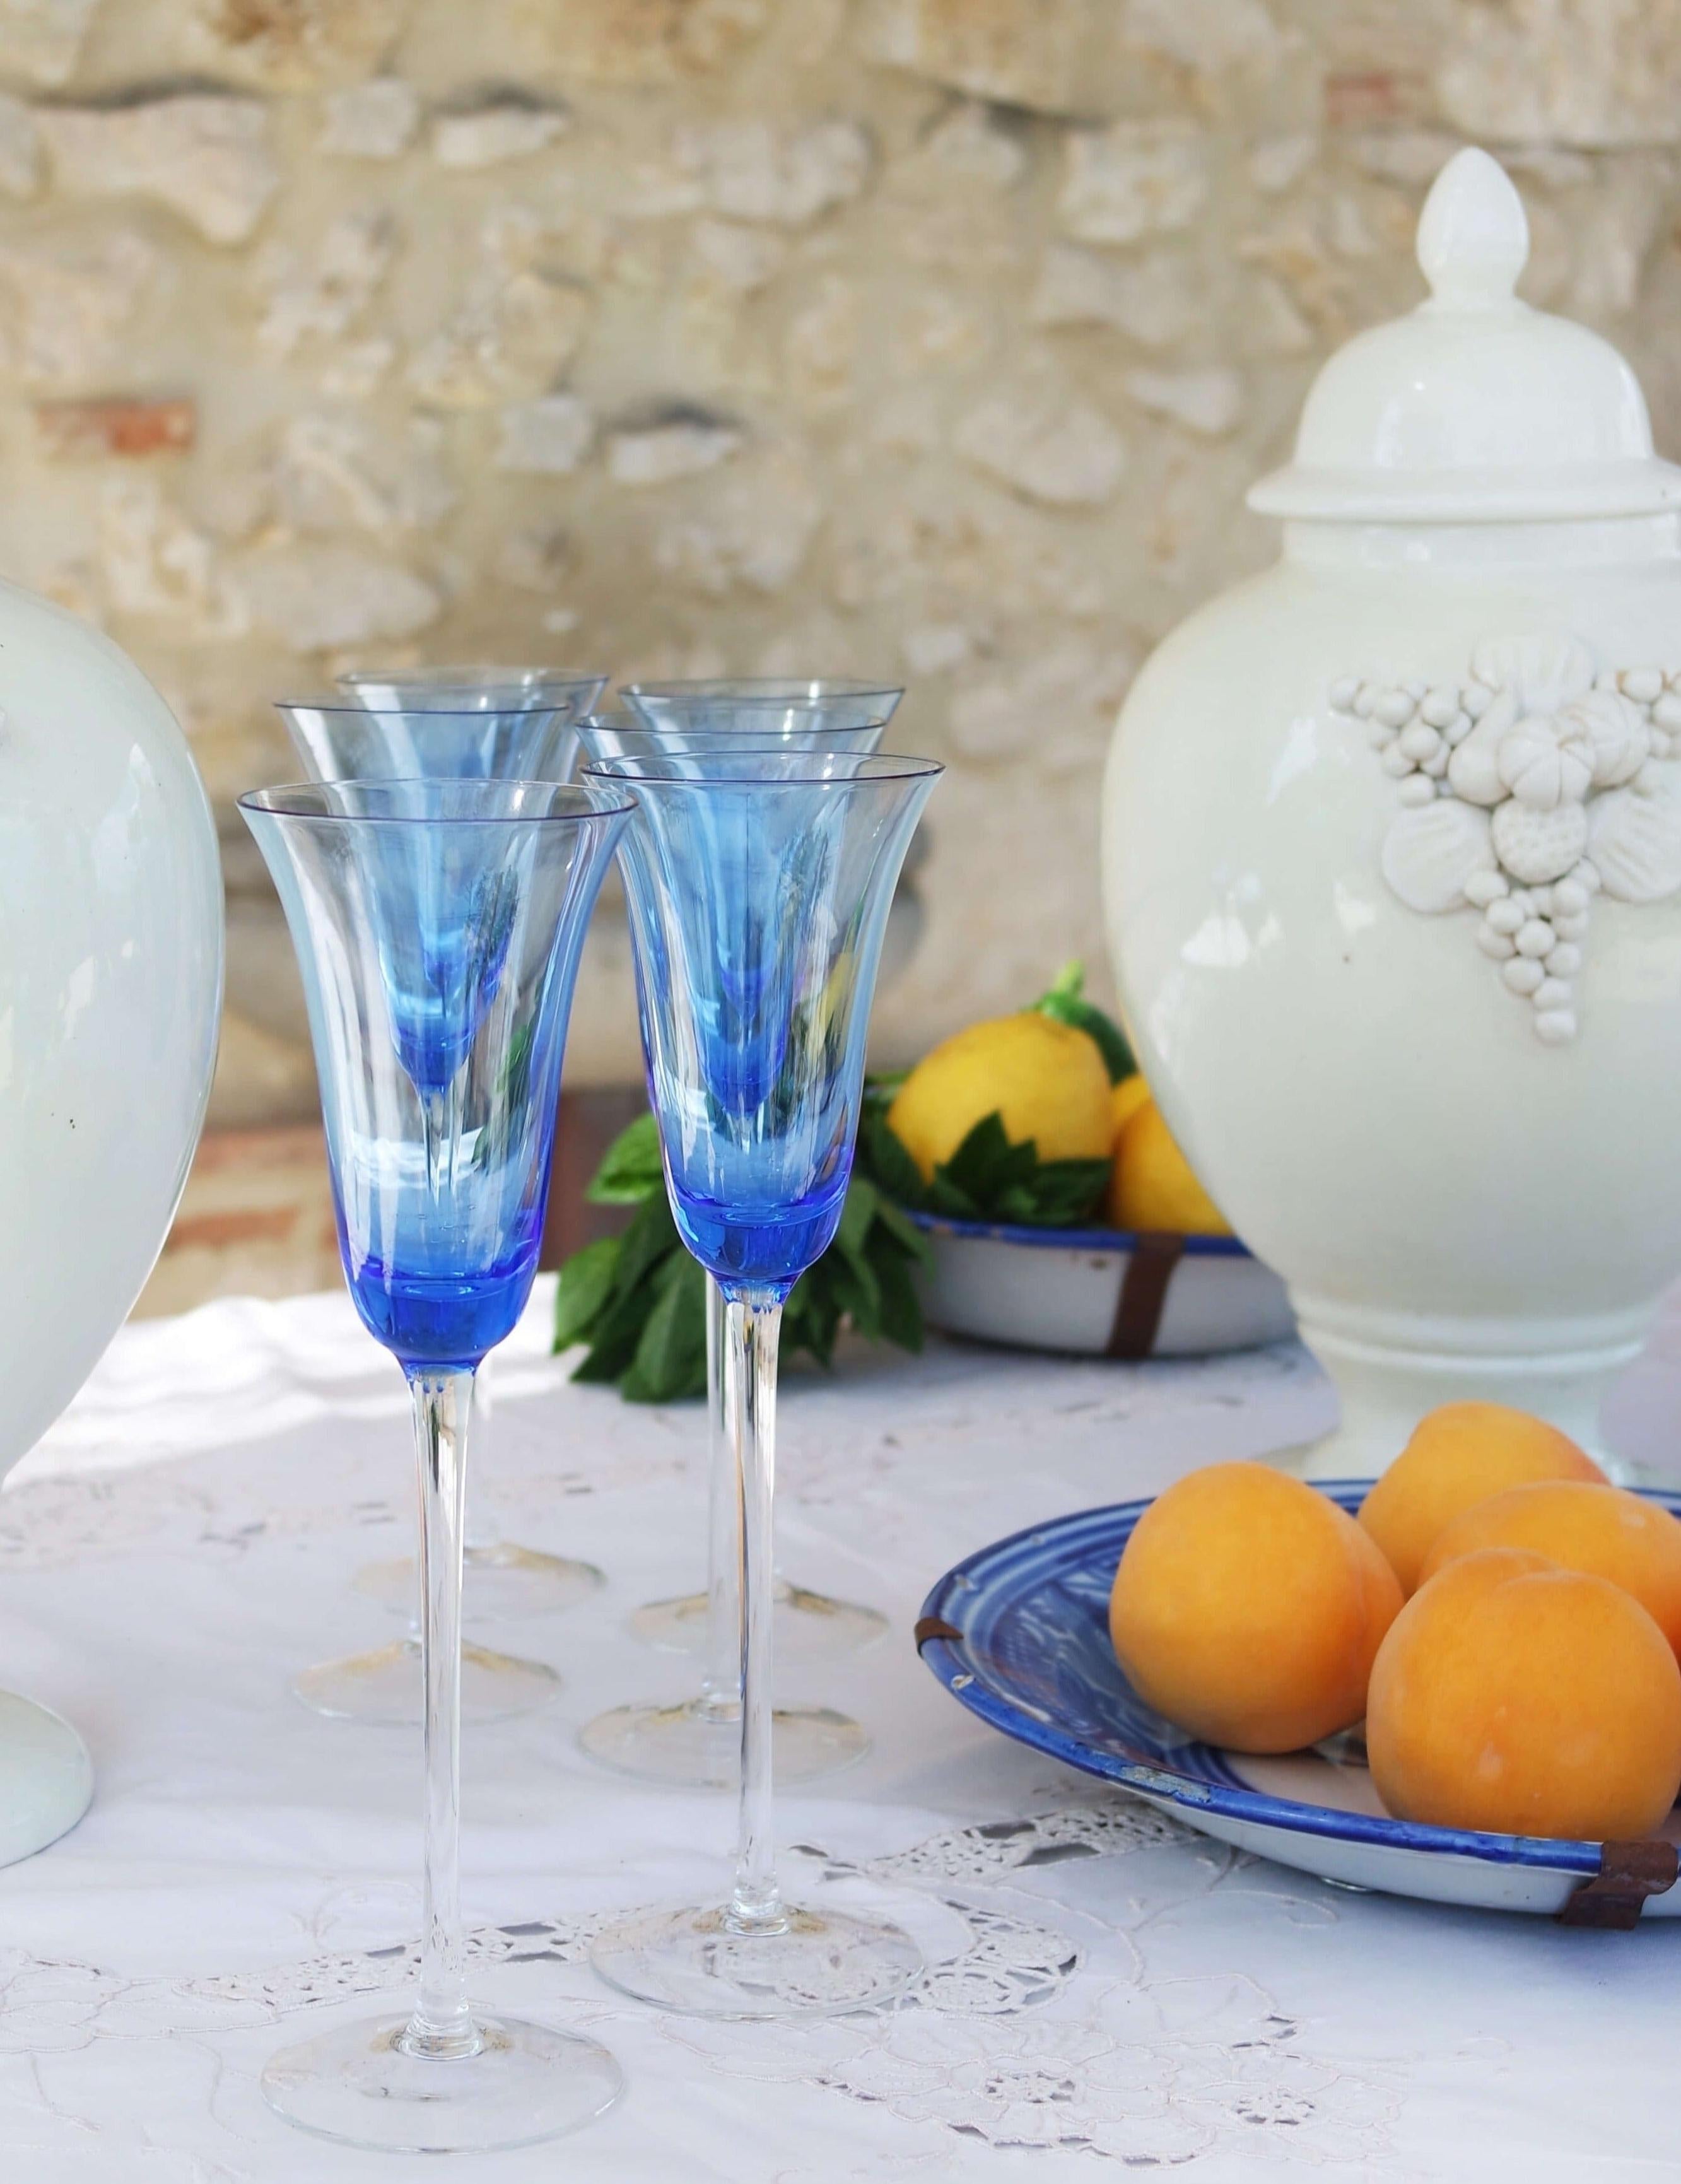 Set of six very tall blue hand-blown Italian wine flutes by Nason Moretti, the Murano glass blowing house in Venice. These glasses have extra long elegant stems and fine blue flutes. Made in the 1980s, they are all hand-blown and in excellent